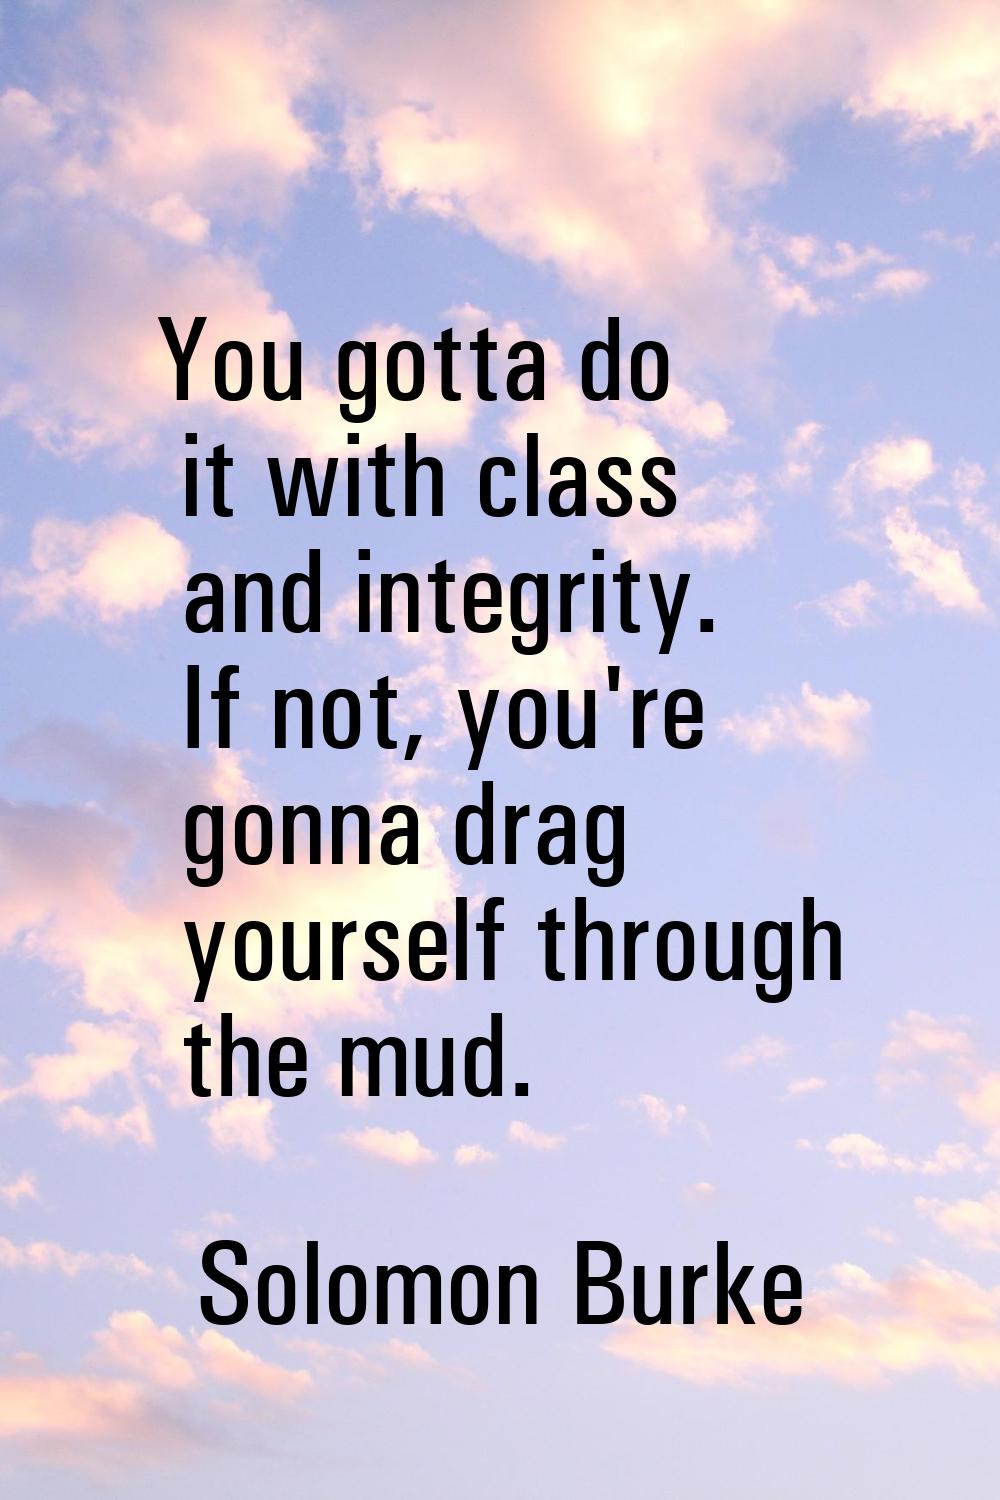 You gotta do it with class and integrity. If not, you're gonna drag yourself through the mud.